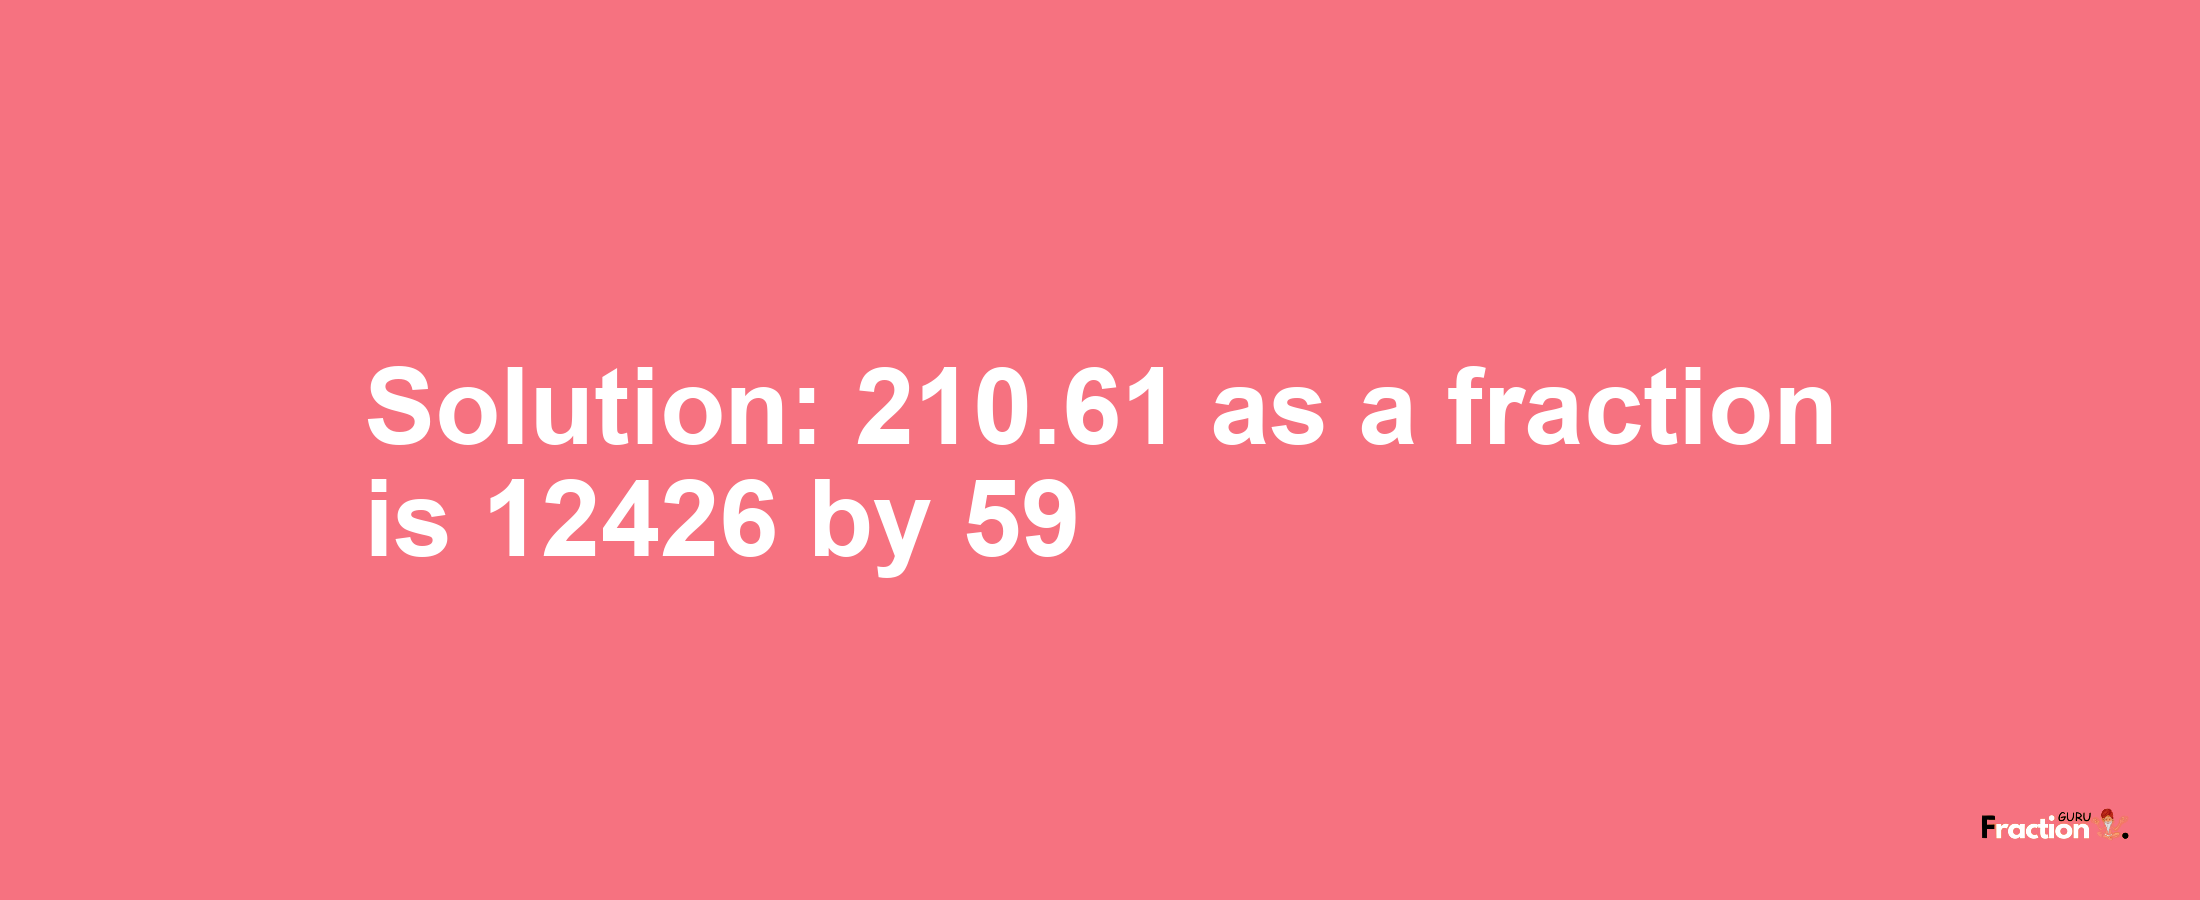 Solution:210.61 as a fraction is 12426/59